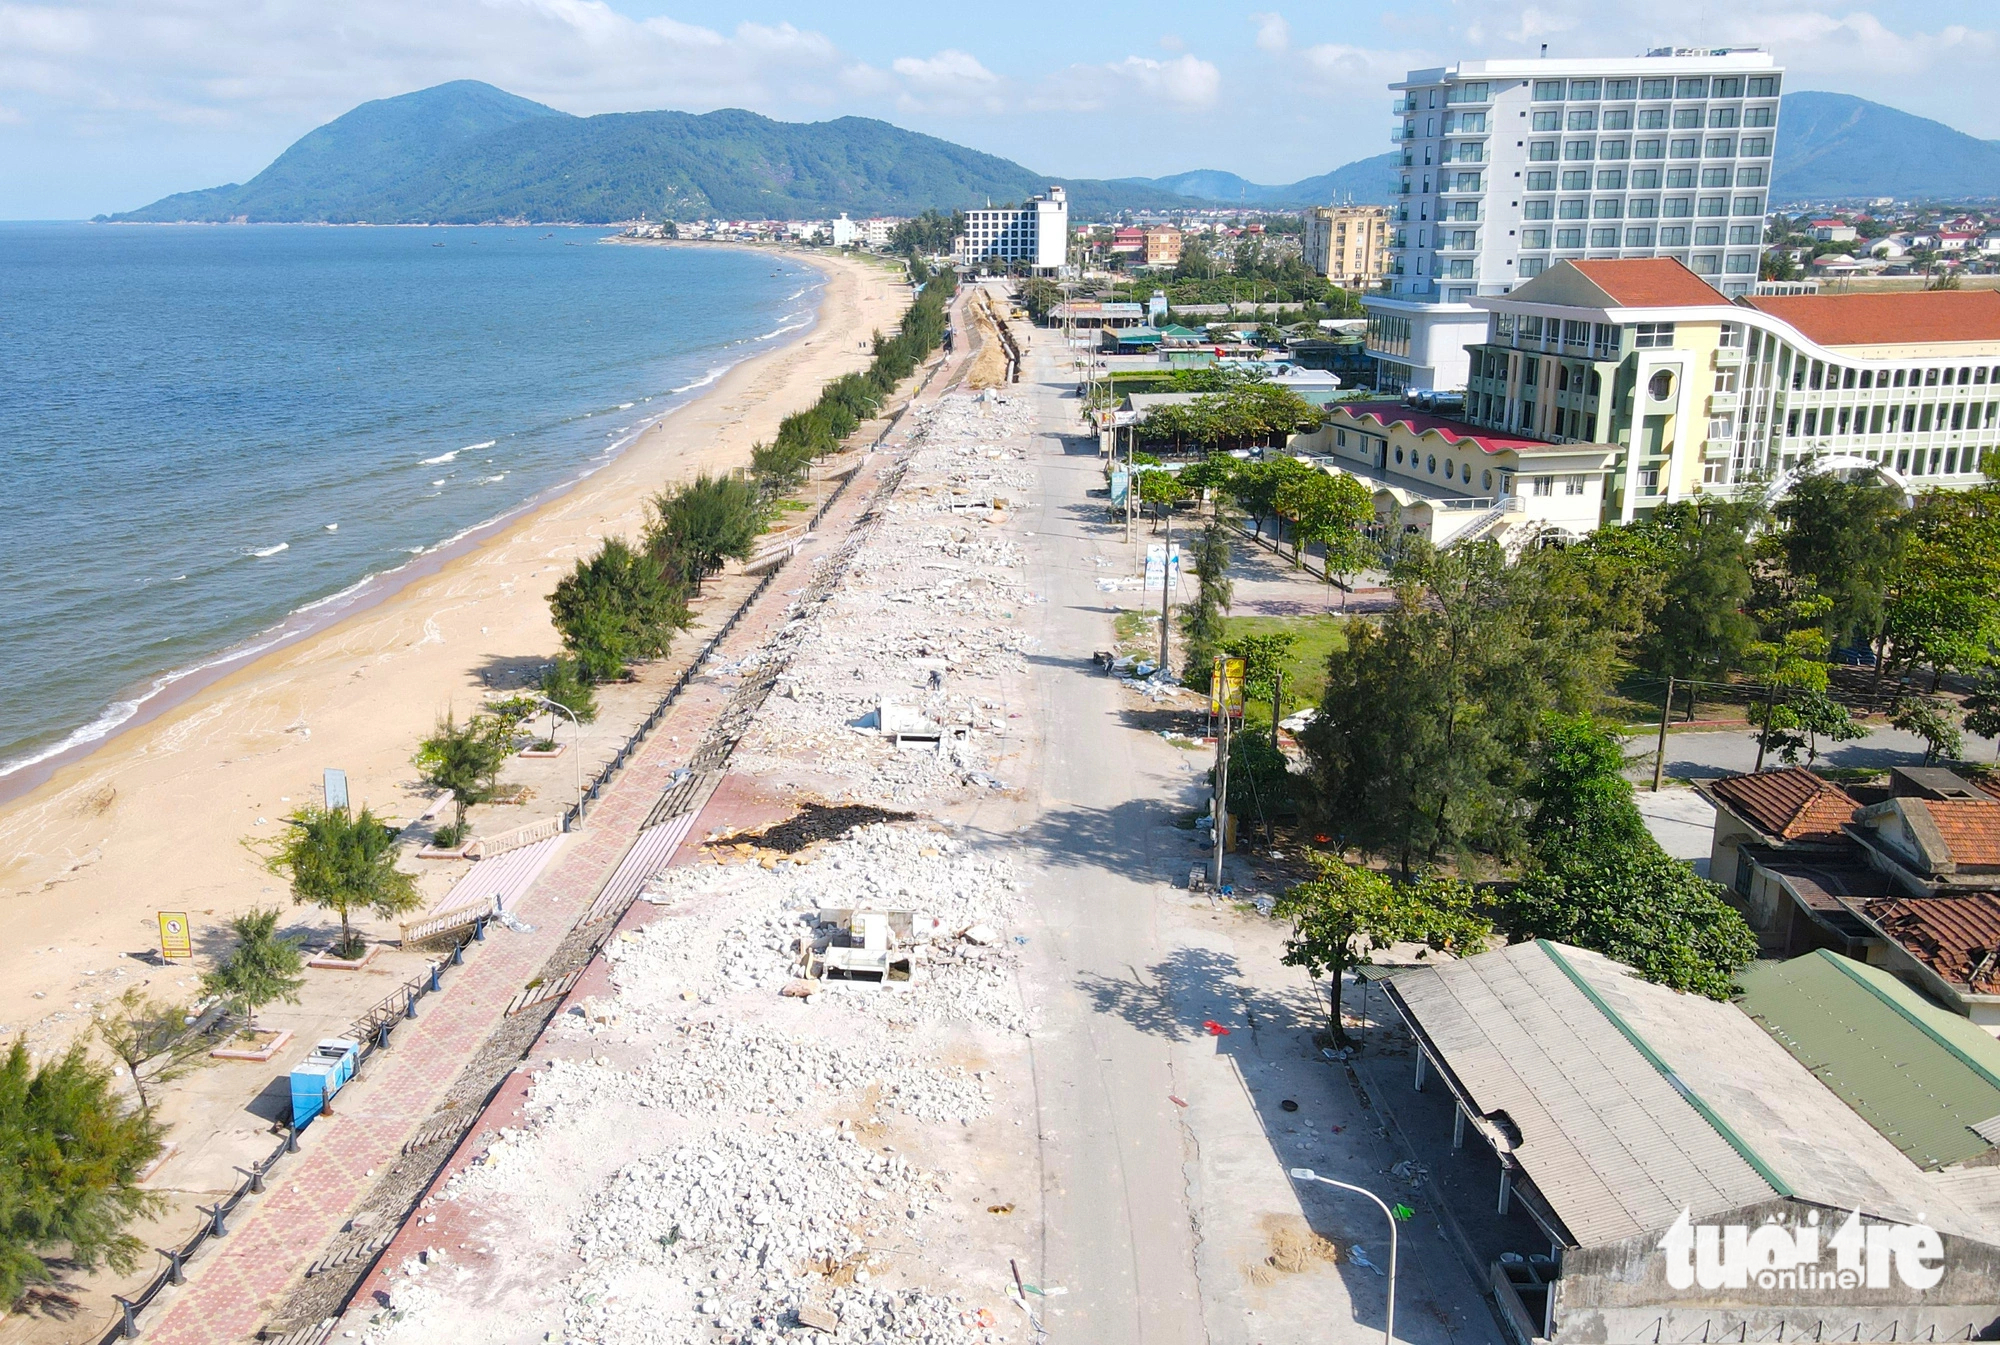 A bird’s eye view of Thien Cam Beach after the clearance of the kiosks. Photo: Le Minh / Tuoi Tre